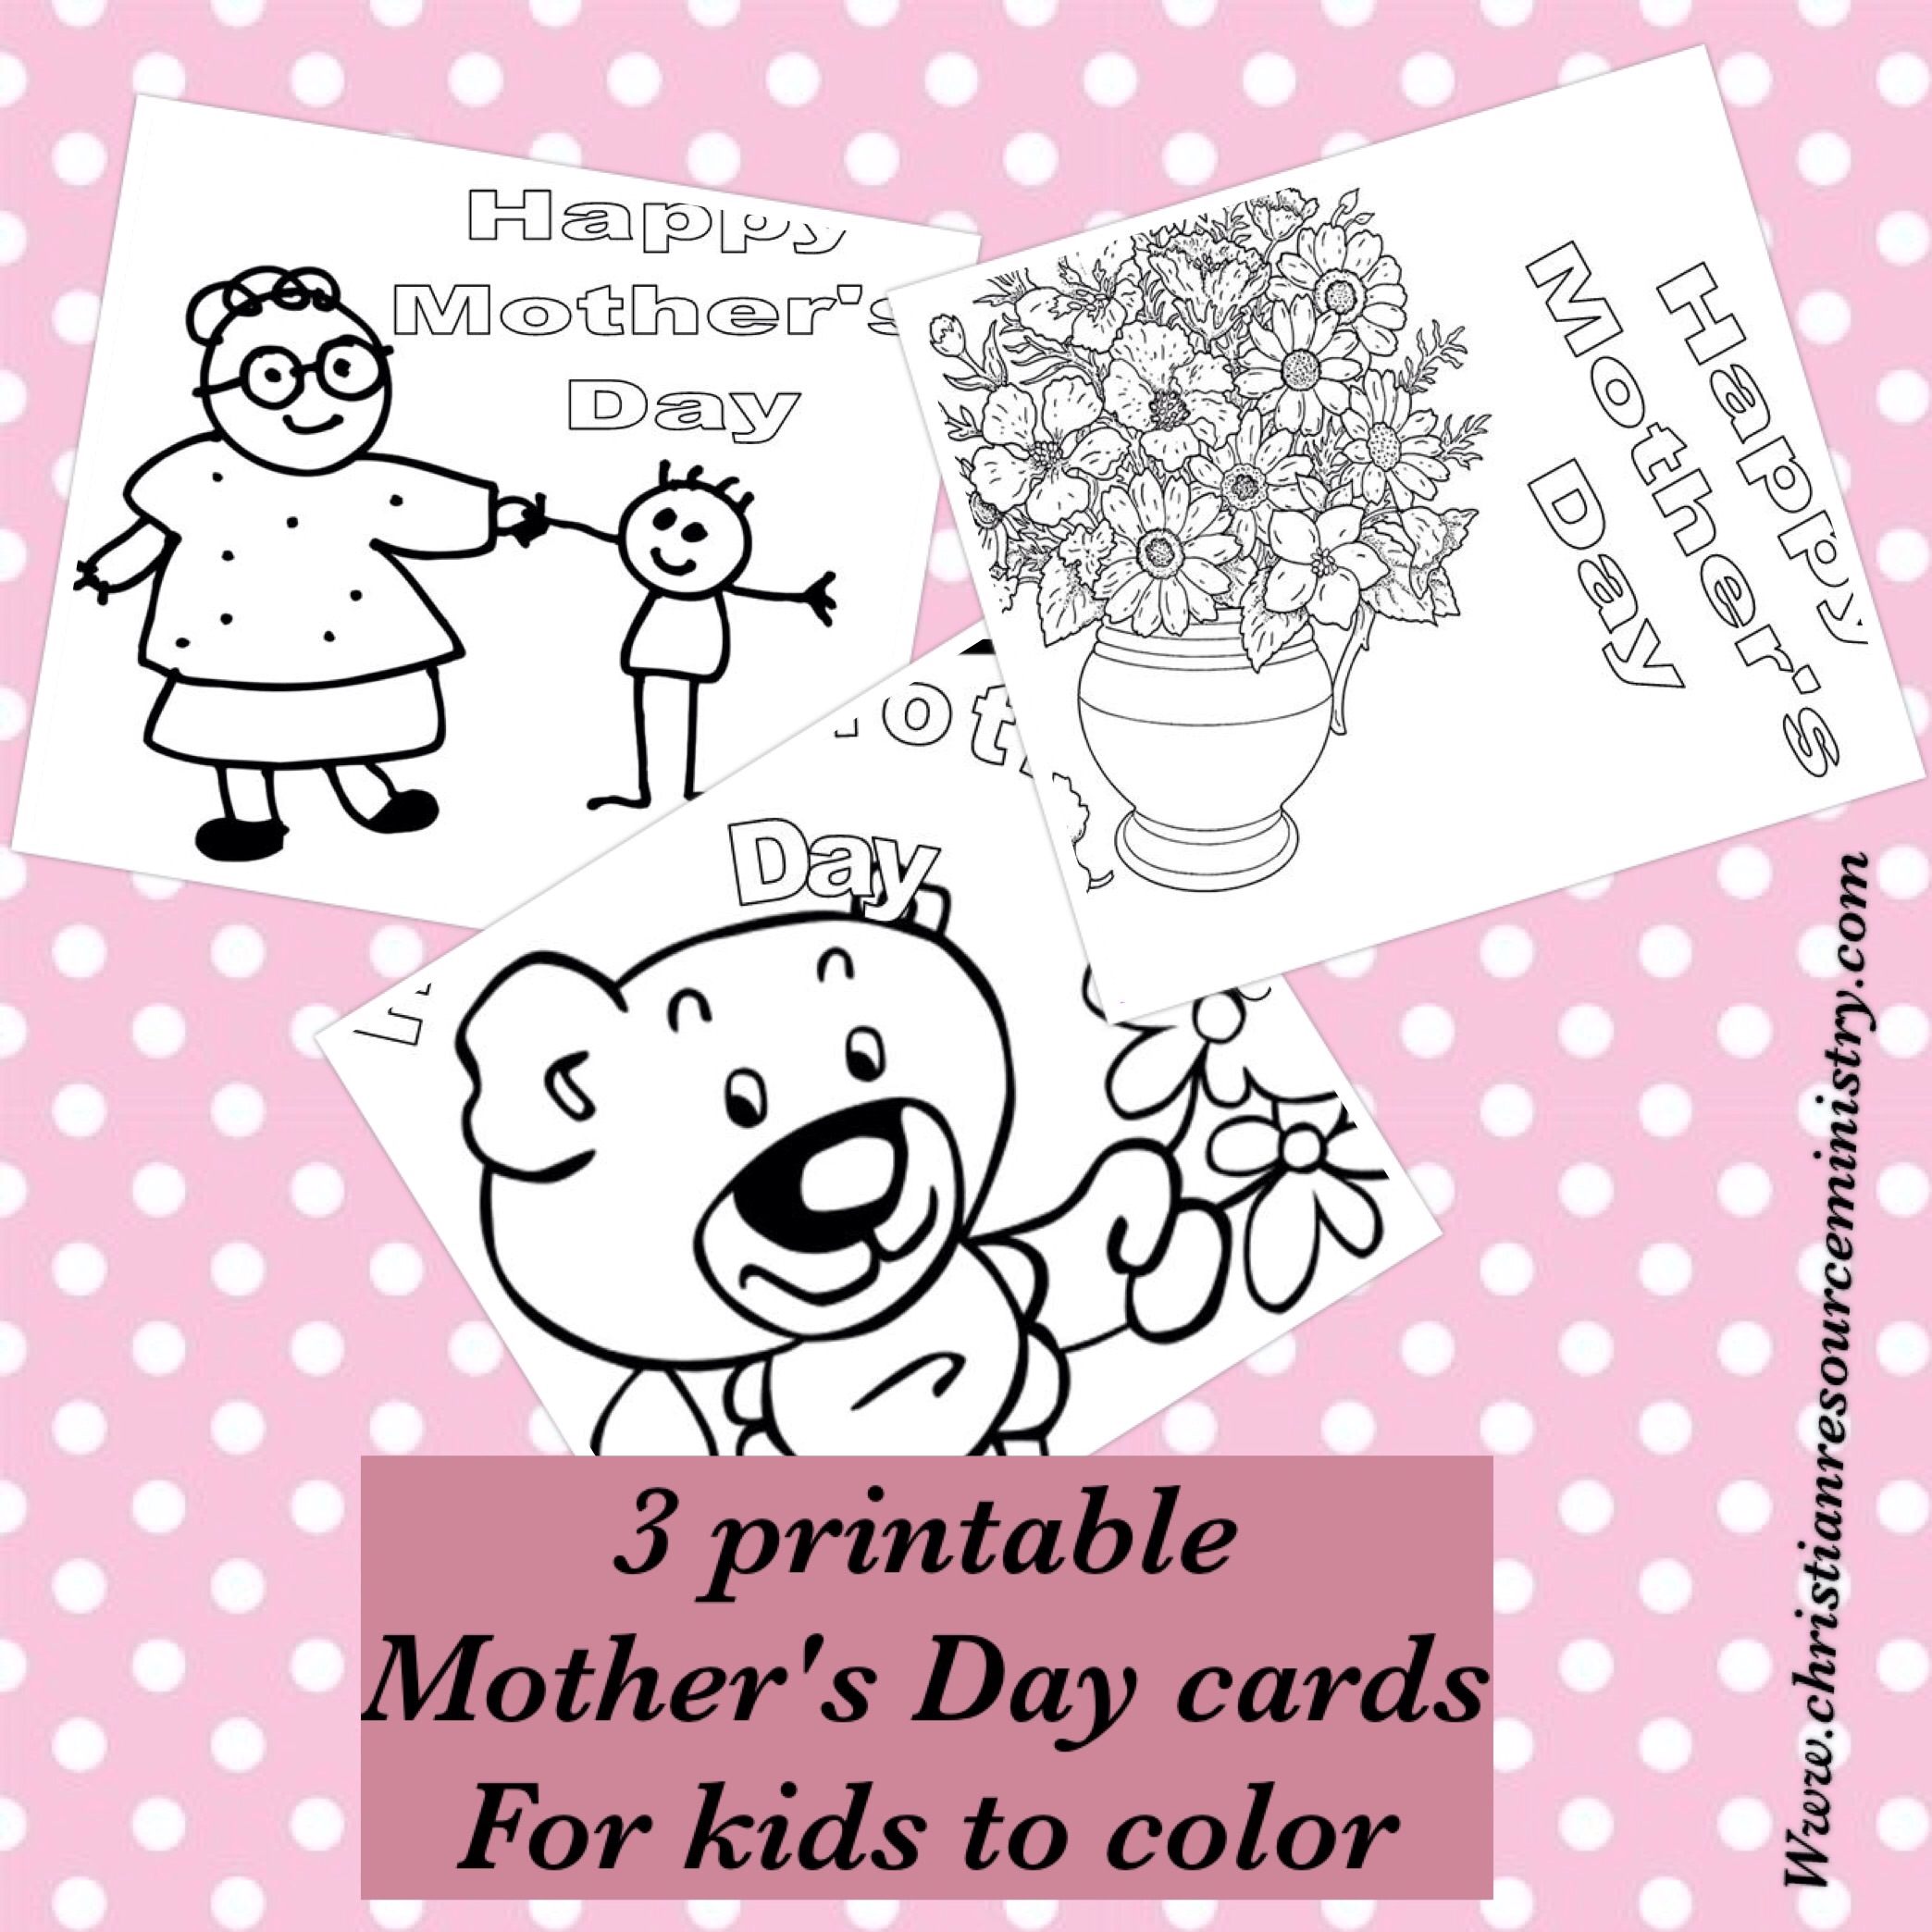 mothers-day-cards-for-kids-to-color-us-mother-s-day-is-just-around